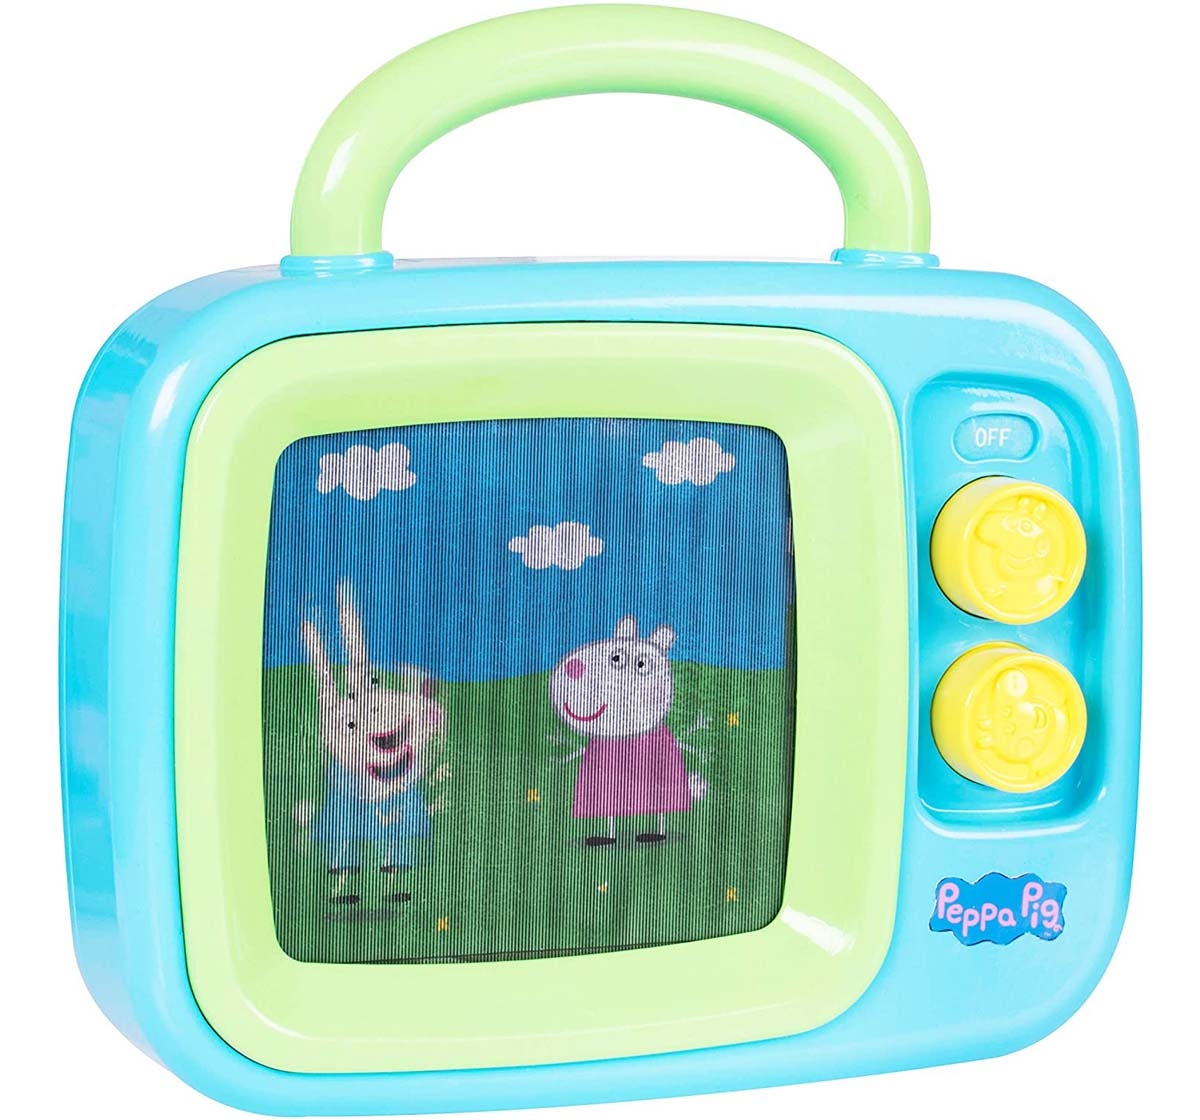 Peppa Pig | Peppa Pig My 1St Tv Roleplay sets for Kids age 18M + 0